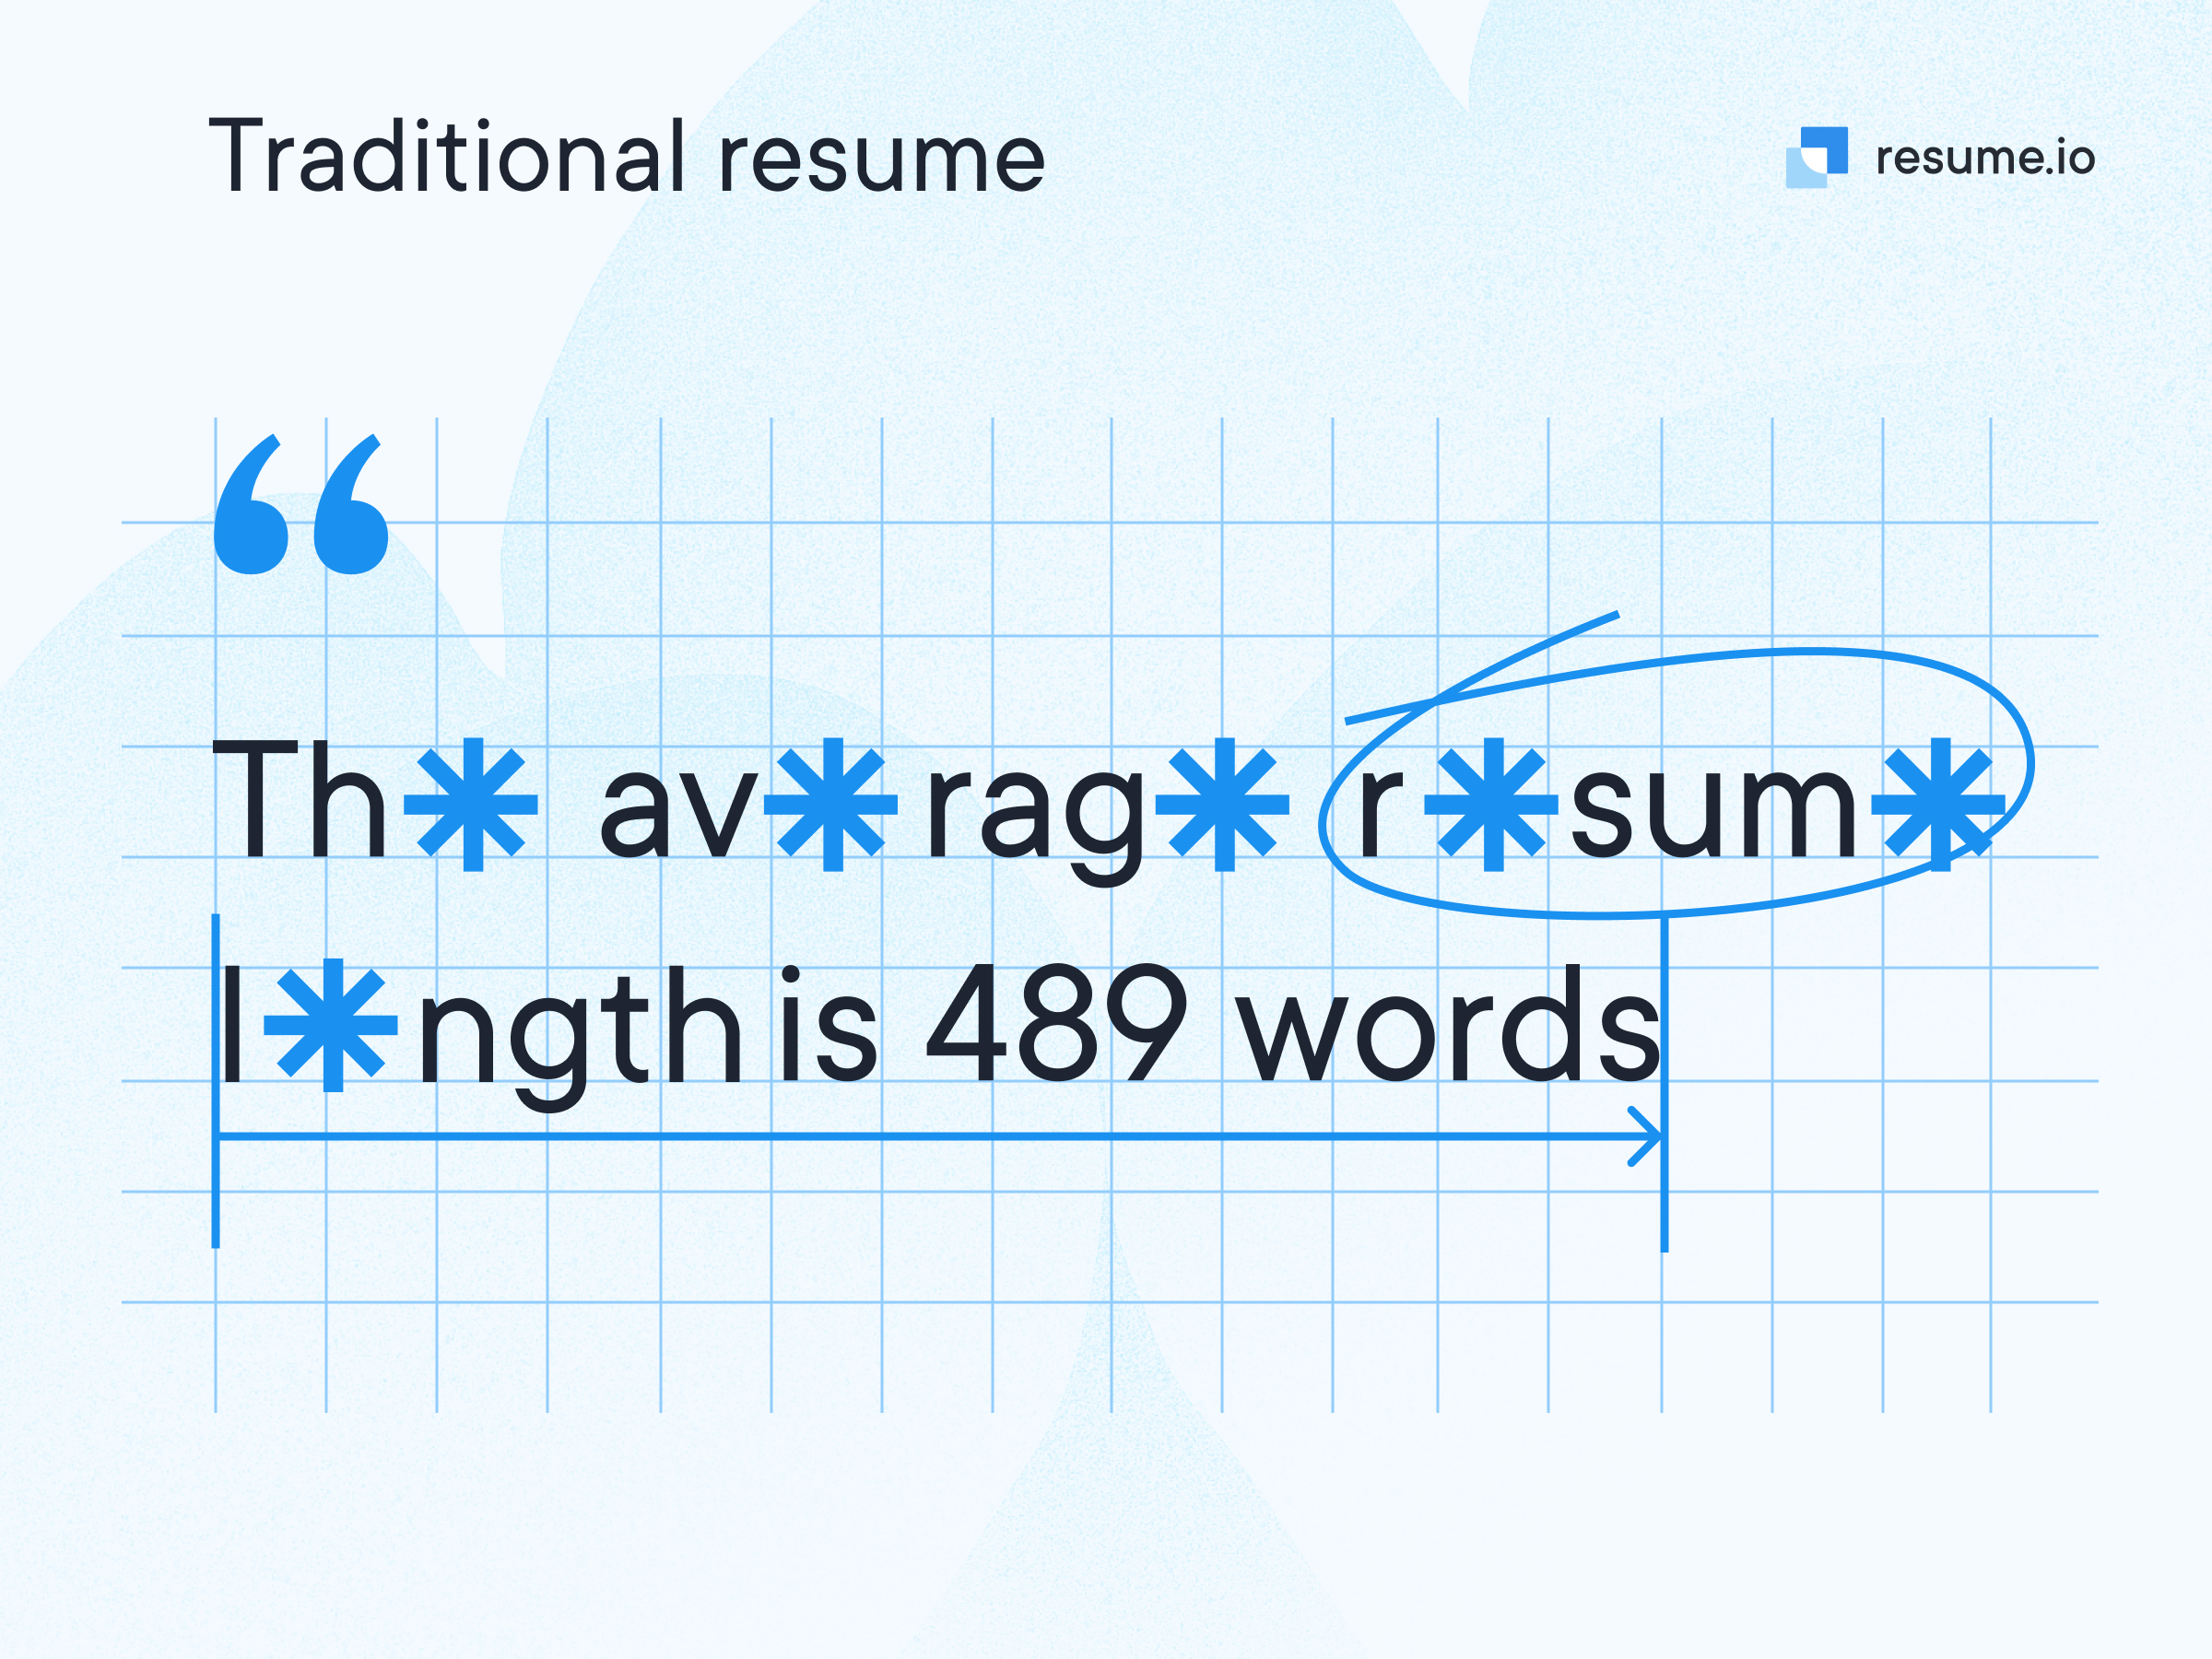 The average resume length is 489 words